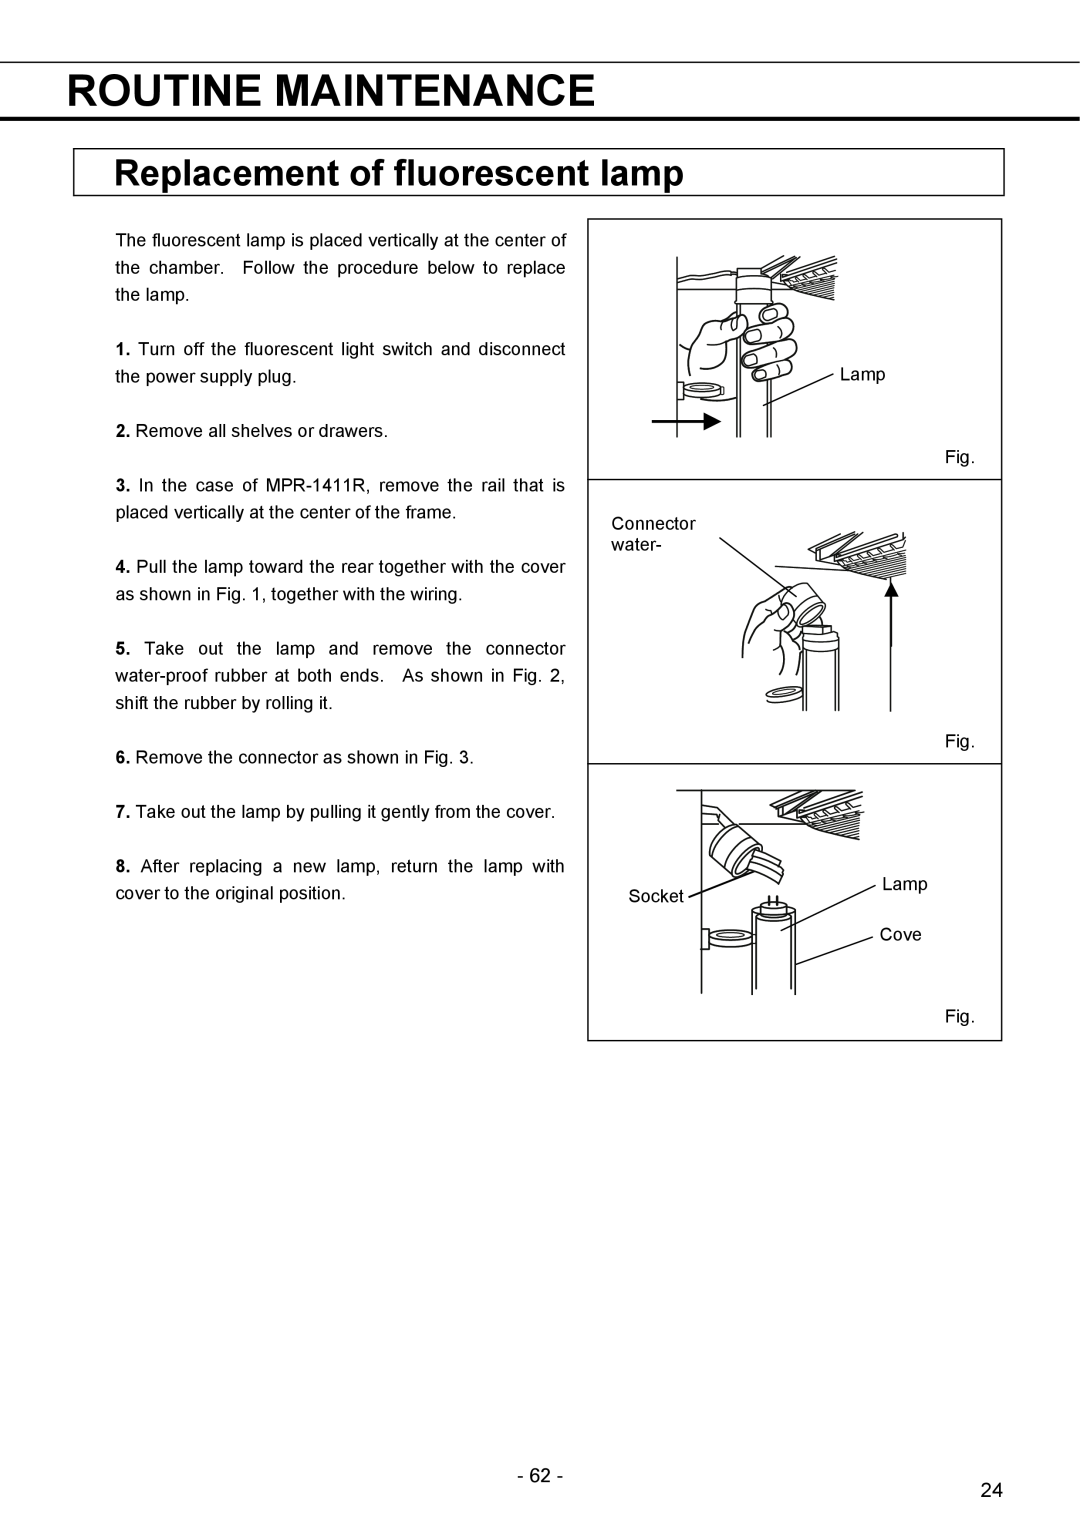 Sanyo MPR-1411R instruction manual Replacement of fluorescent lamp, Routine Maintenance 